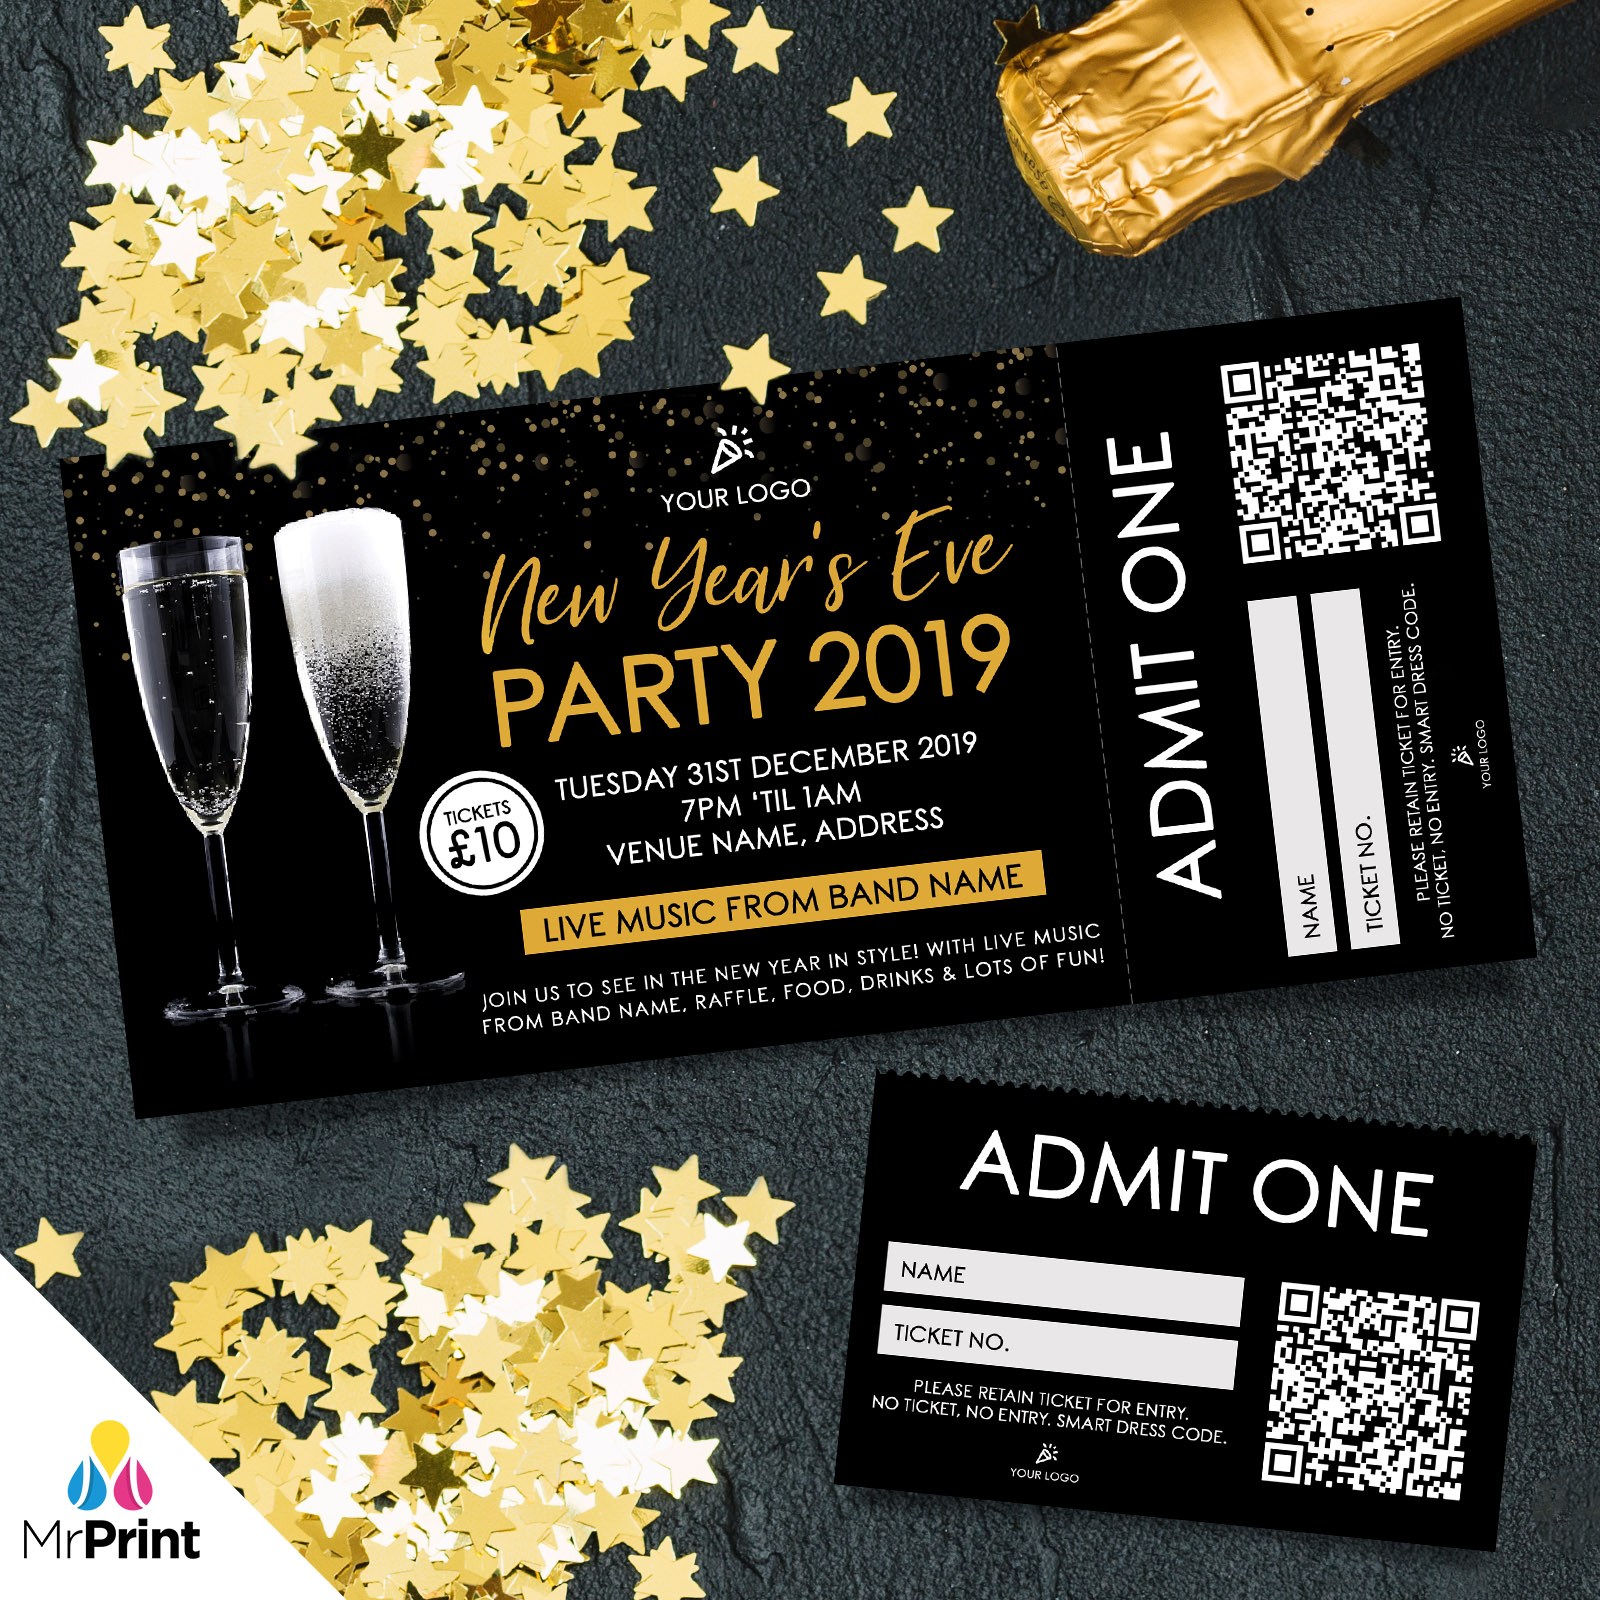 CUSTOM NEW YEAR'S EVE PARTY TICKET PRINTING PERFORATED STUBS ANY